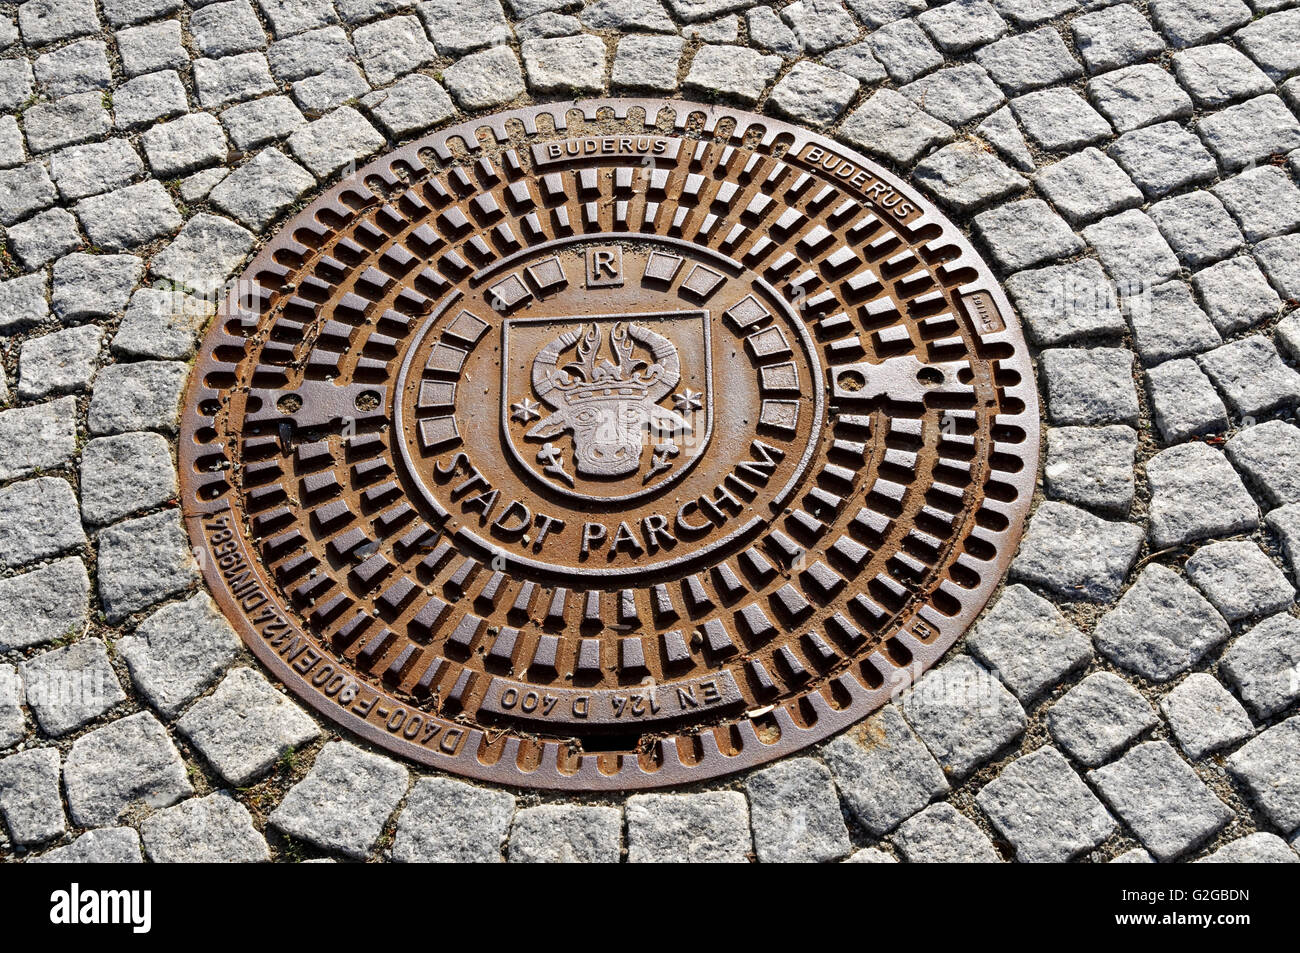 Man-hole cover with inscription, 'Stadt Parchim', Parchim, Mecklenburg-Western Pomerania, Germany Stock Photo